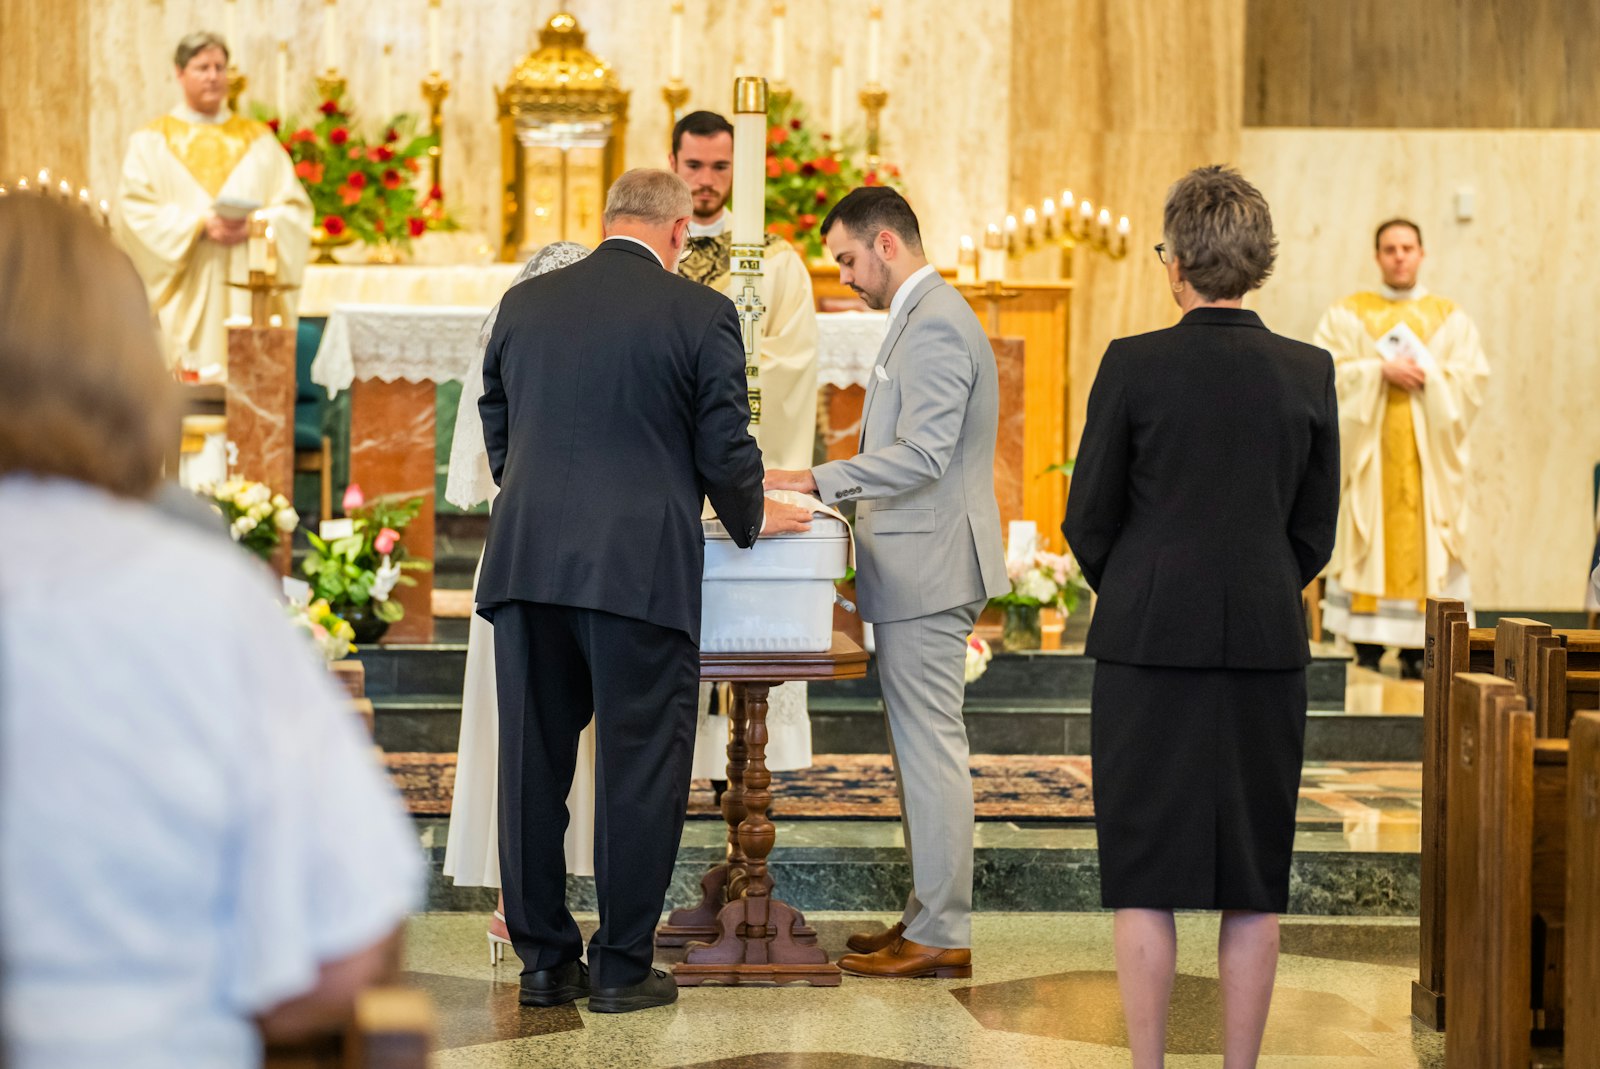 Fr. David Pellican presides over the funeral Mass of Maria Teresa and Rachel Clare LeBlanc on May 31 at the Church of the Divine Child in Dearborn as their parents, Austin and Nicole LeBlanc, place their hands over the tiny casket. (Valaurian Waller | Detroit Catholic)